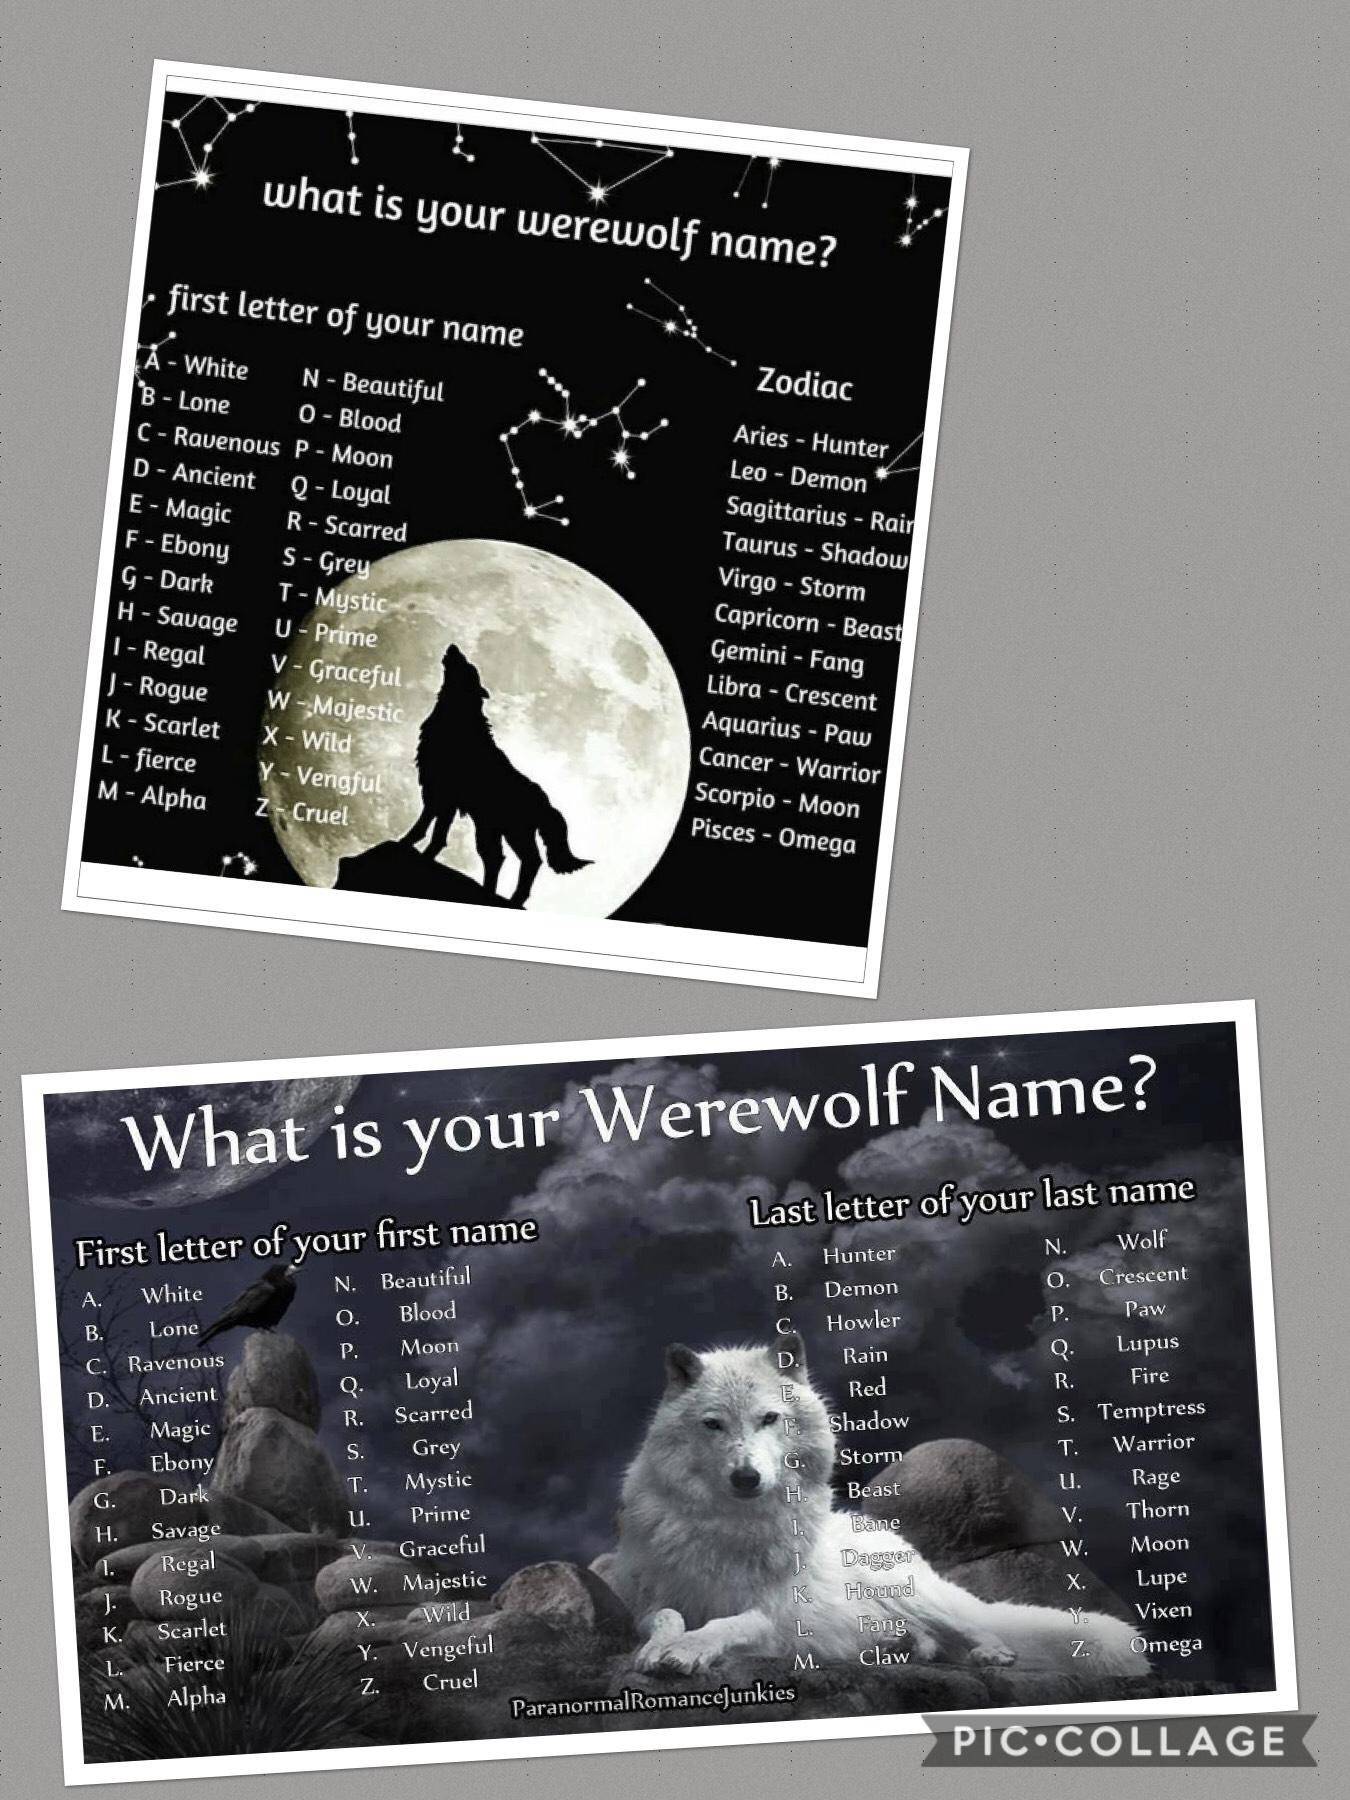 What is your werewolf name? I know  already posted this, but it wasn’t as clear before!